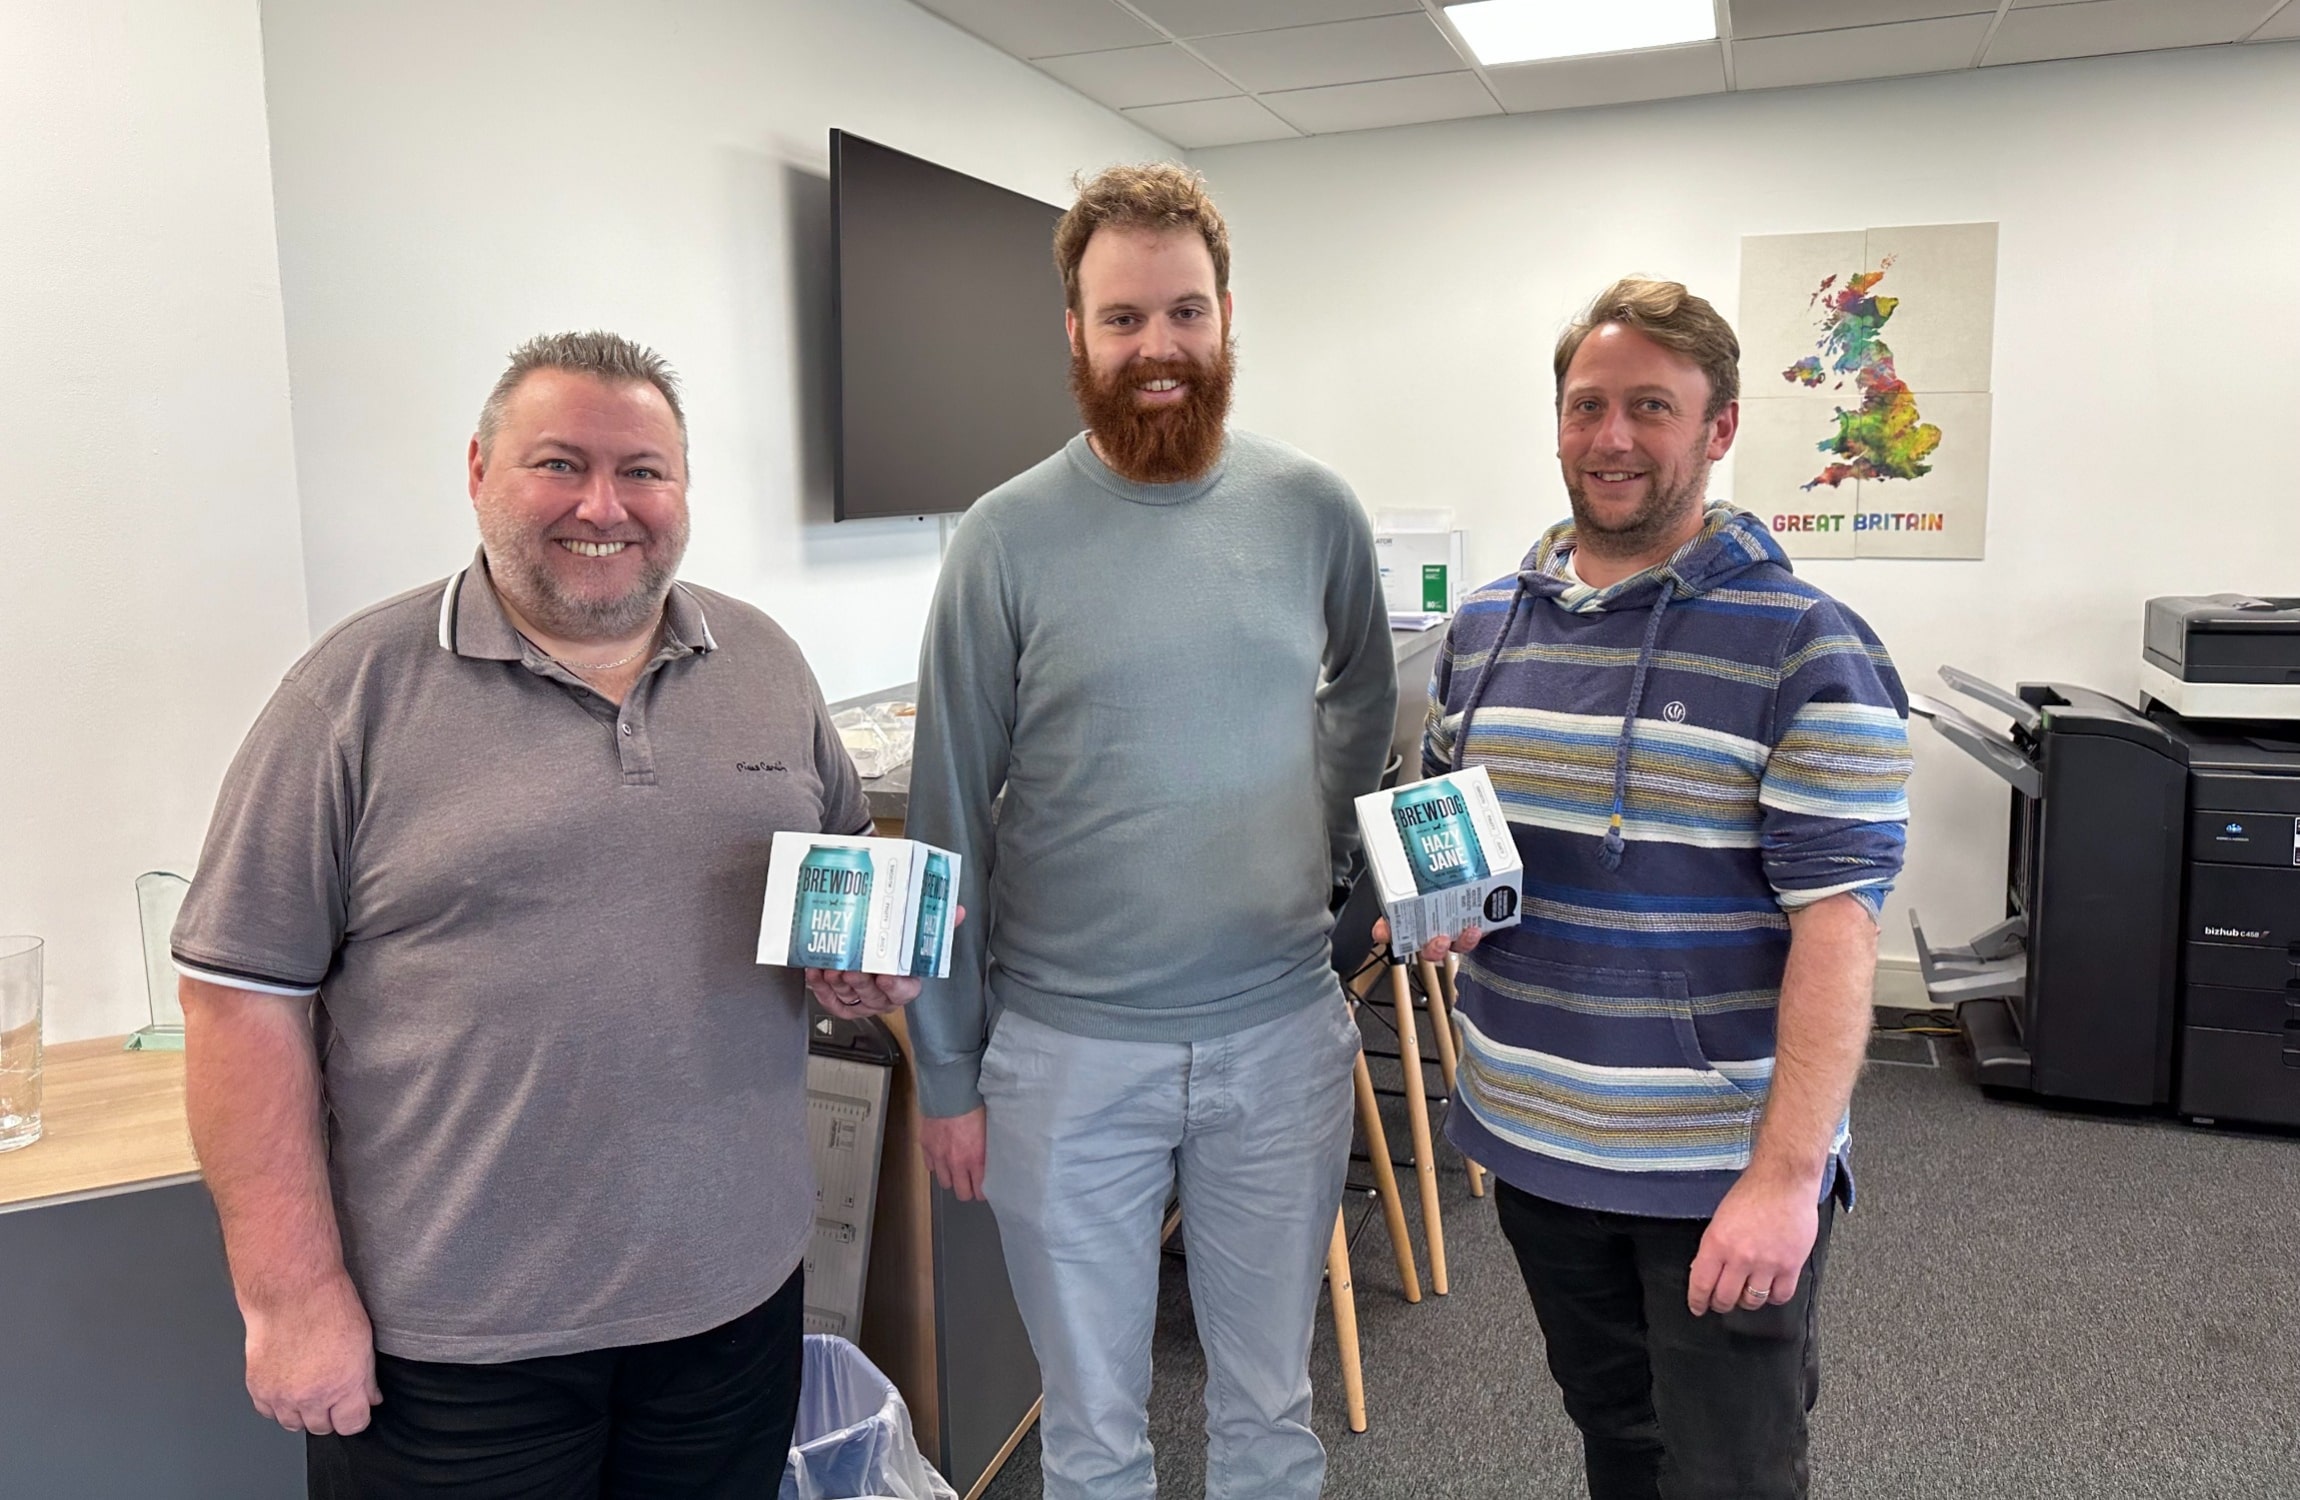 Three men stood in an office with two of them holding a prize they won from a quiz.